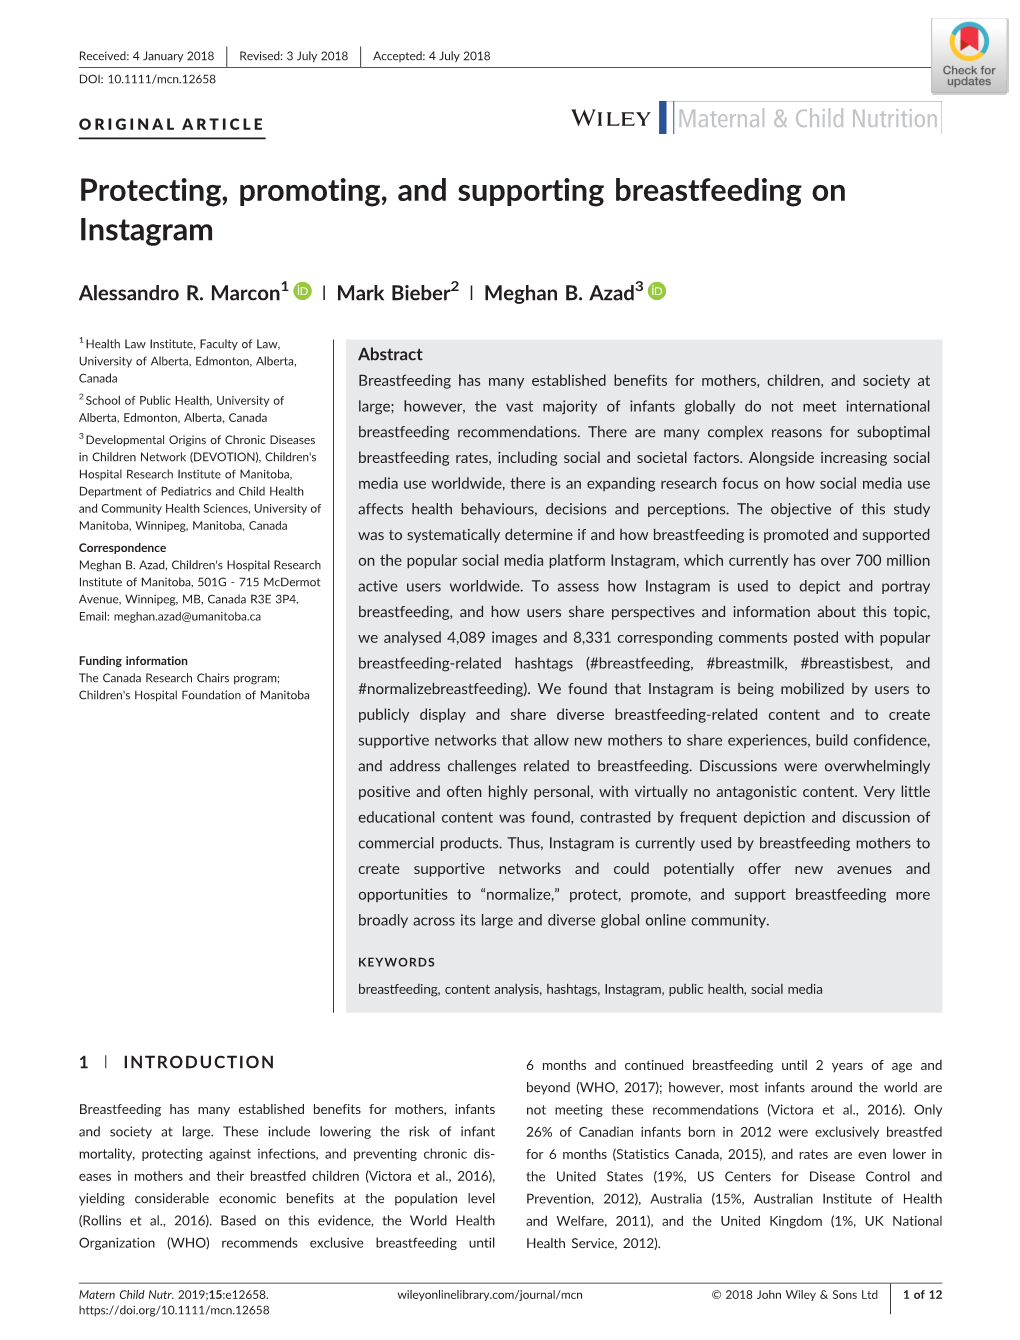 Protecting, Promoting, and Supporting Breastfeeding on Instagram